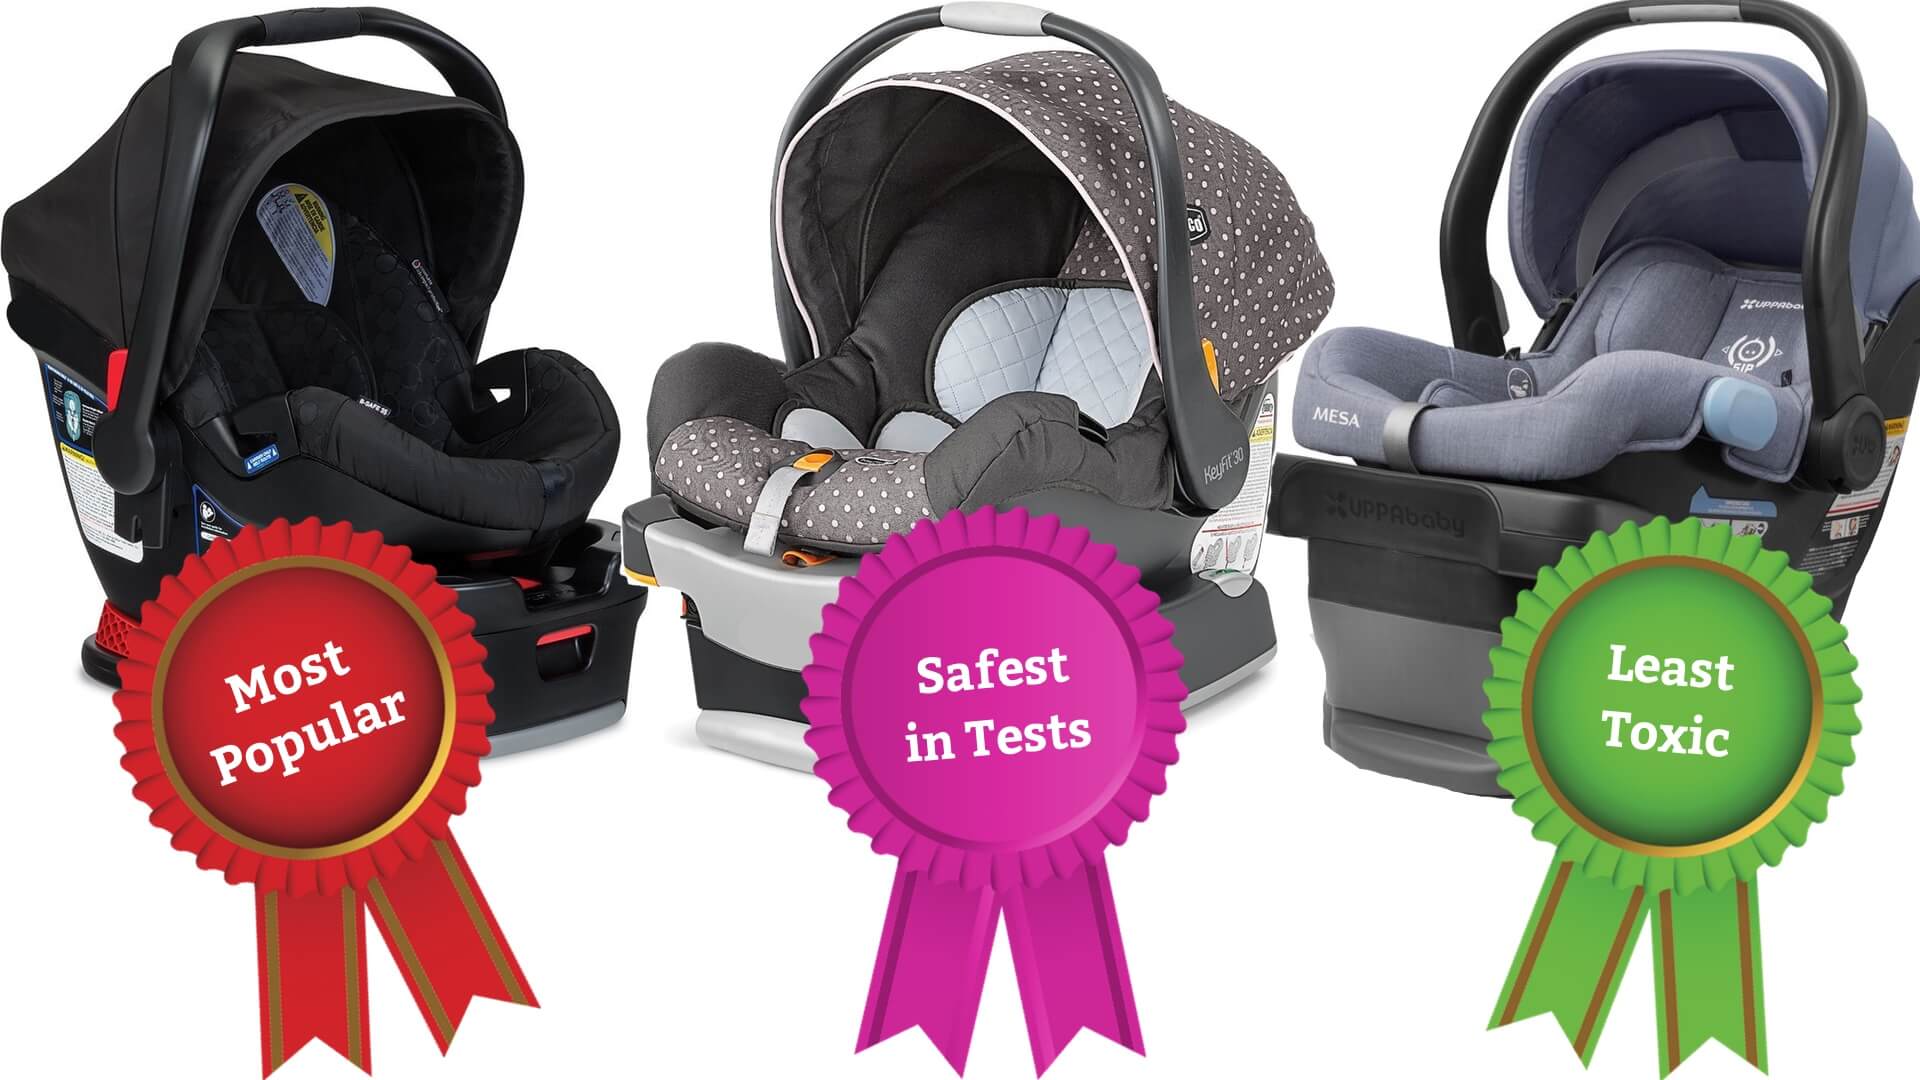 Best Infant Car Seat Safest Most Natural Options - What Is The Best And Safest Baby Car Seat